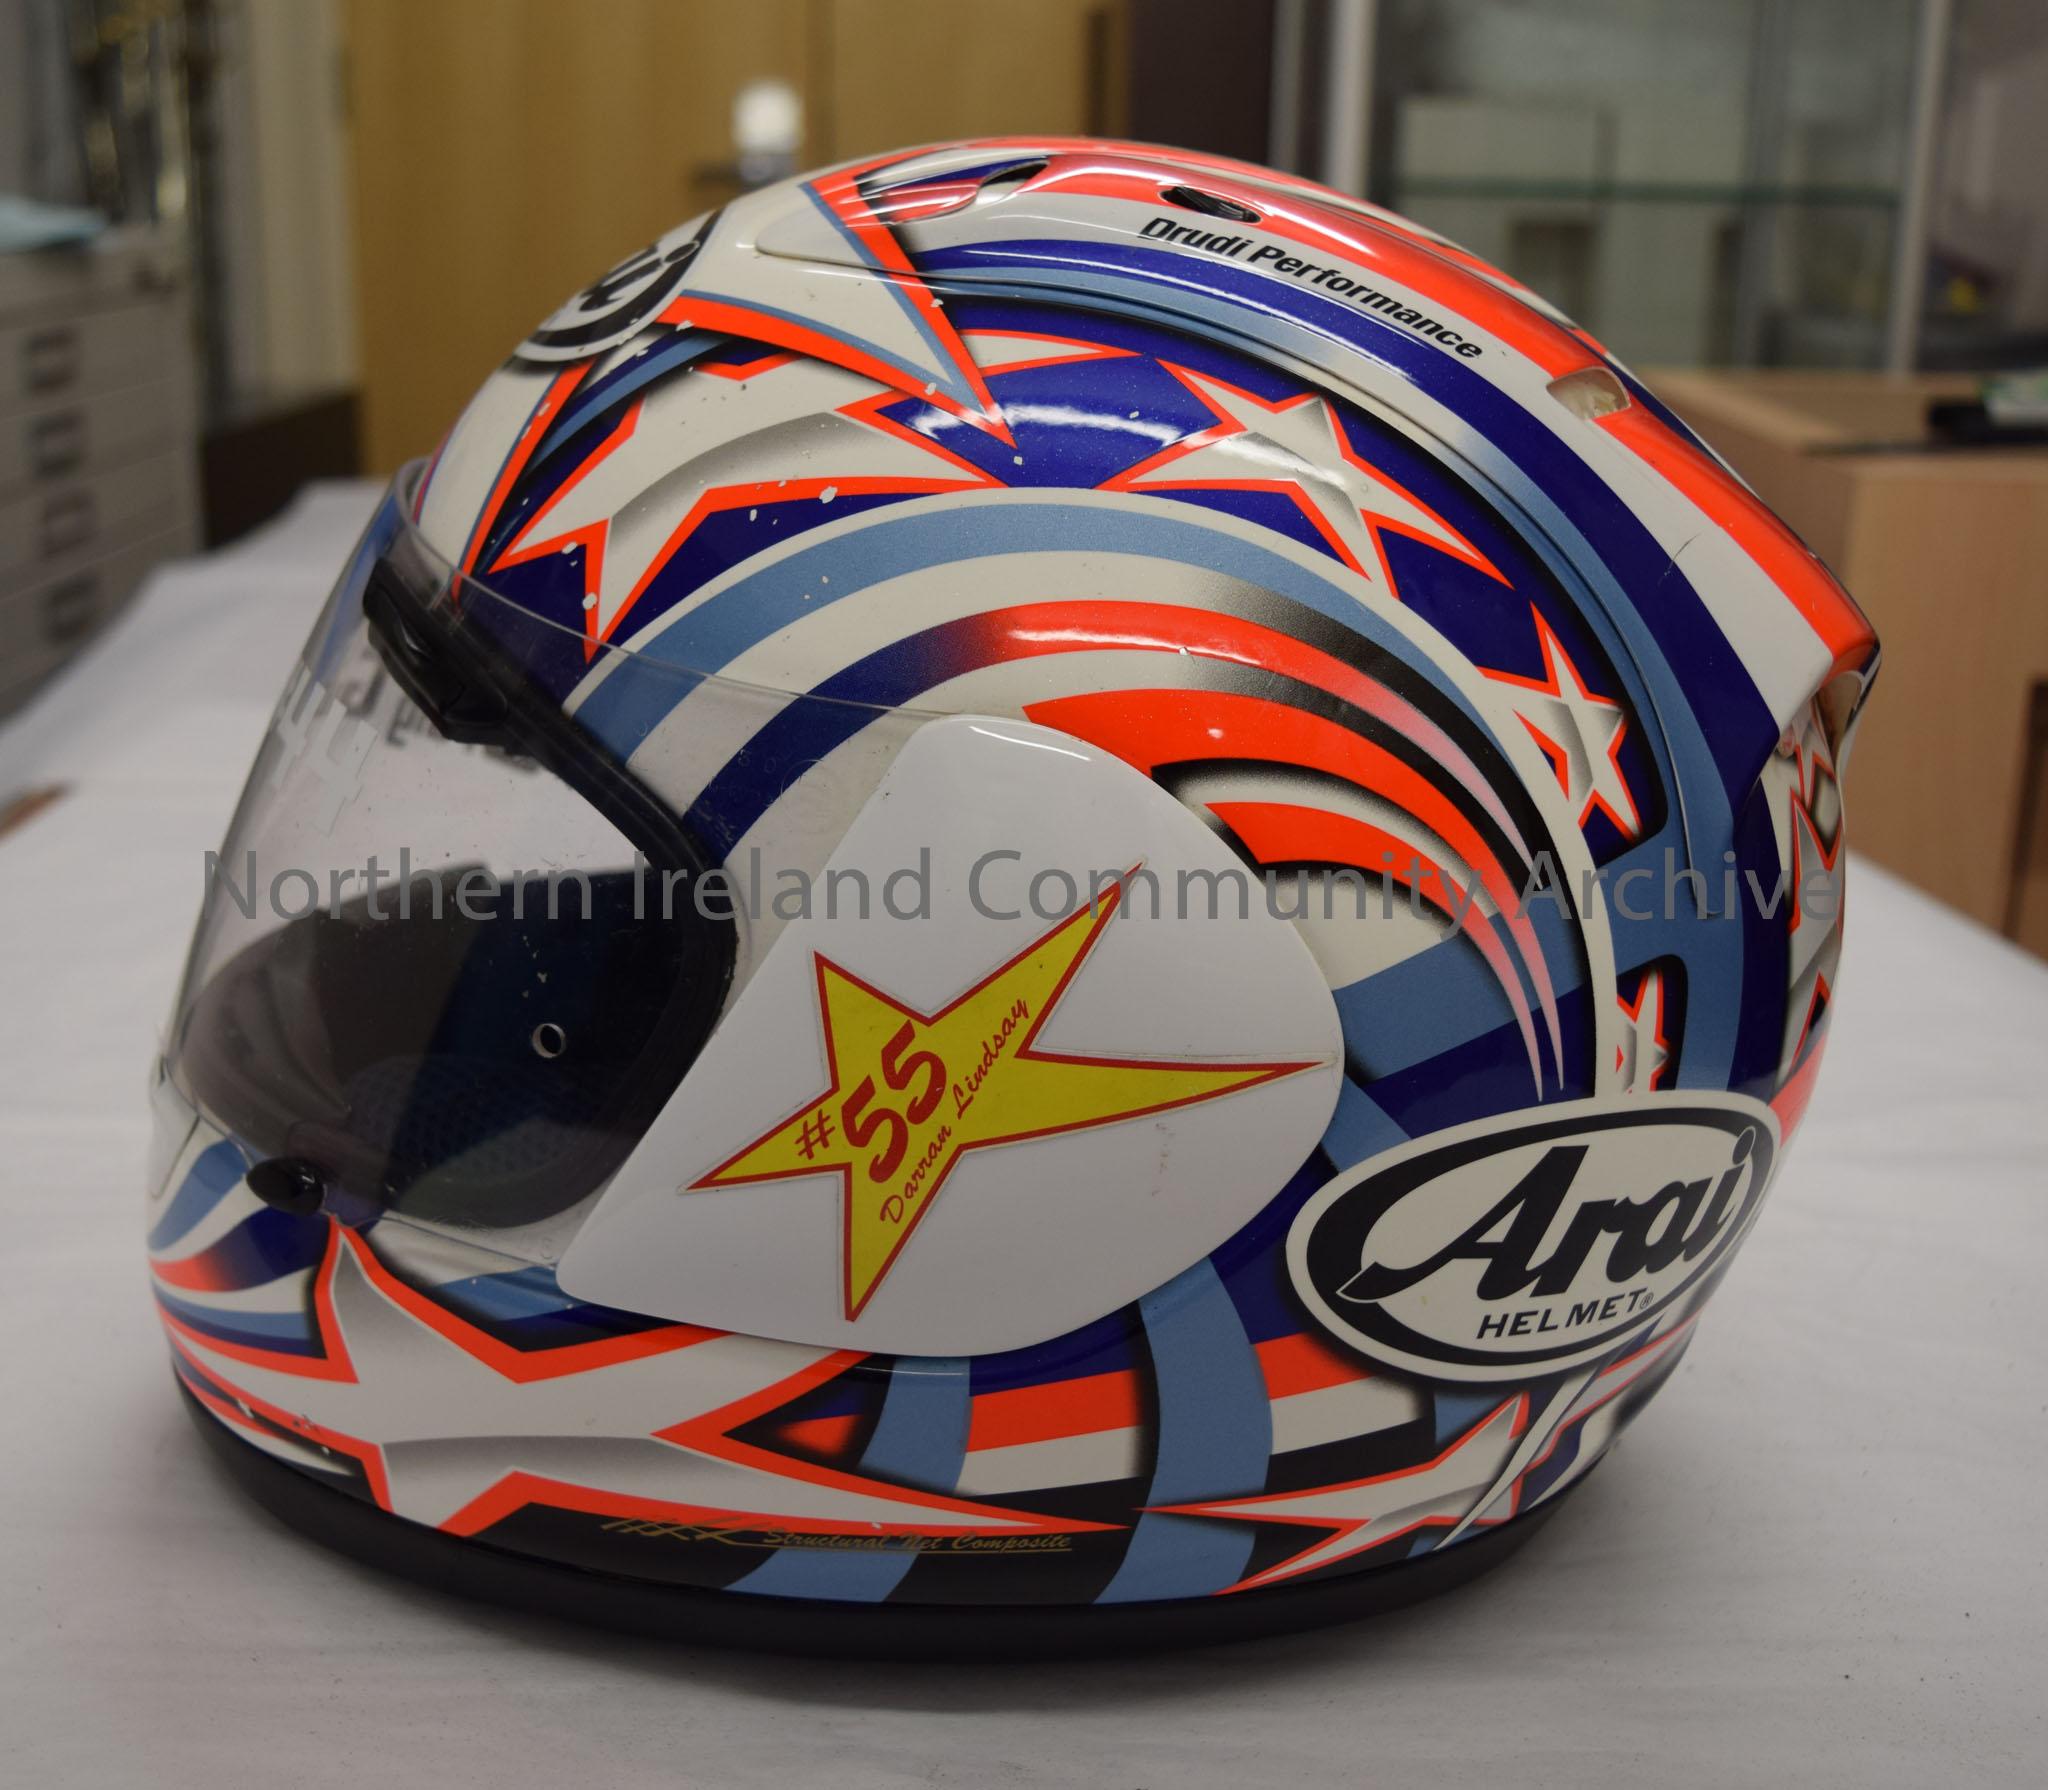 Arai Helmet belonging to Craig Gibson #44. White with blue stripes and silver stars with orange trim – 2016.30 (3)